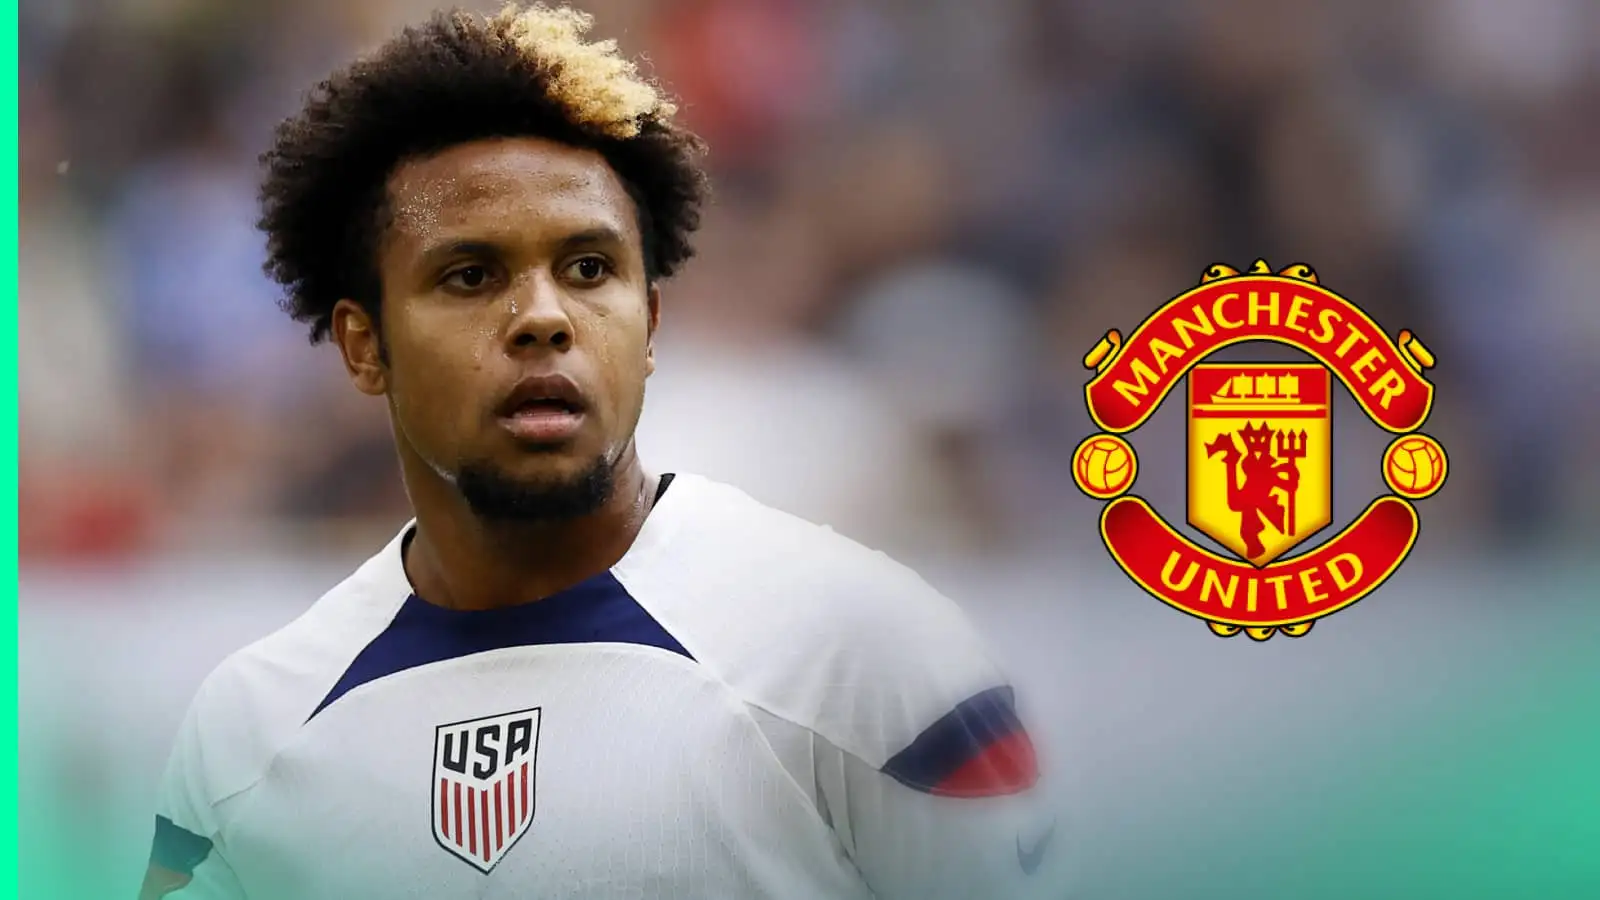 Man Utd plot spectacular USMNT star signing as former rival player ‘pinpointed’ as ideal midfield man